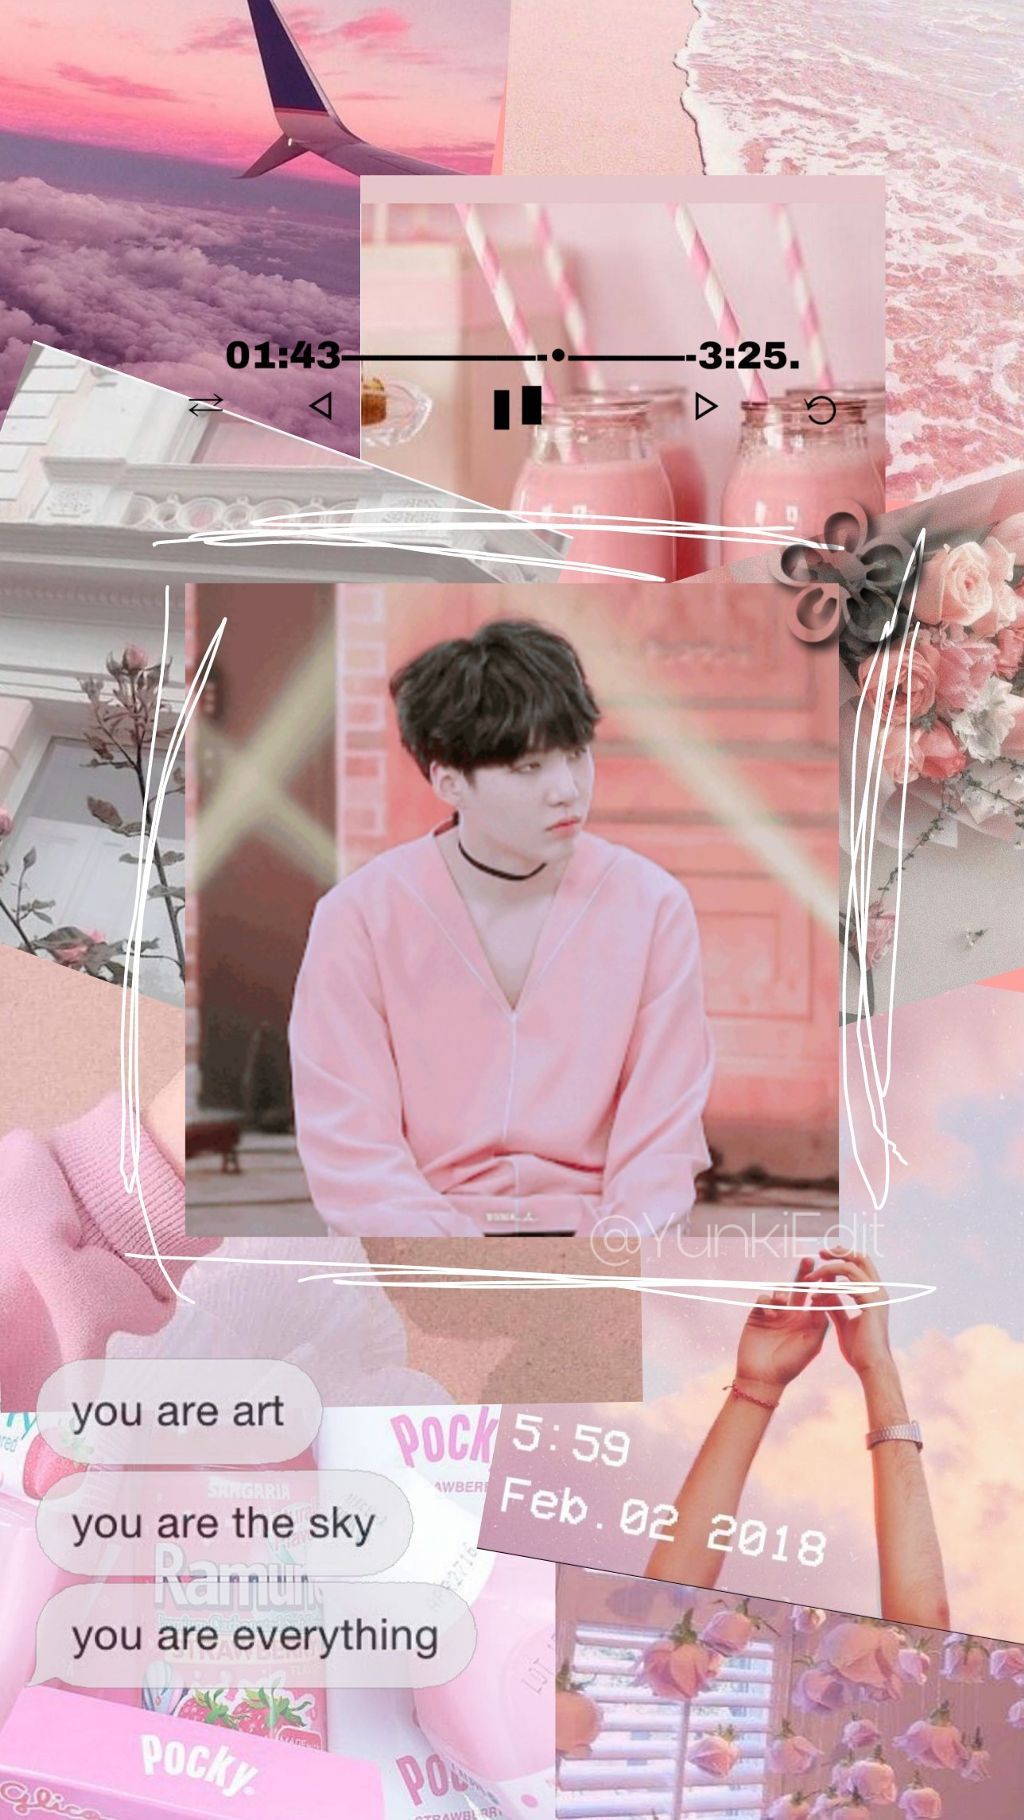 Pink aesthetic wallpaper with images of a pink haired boy and flowers - Suga